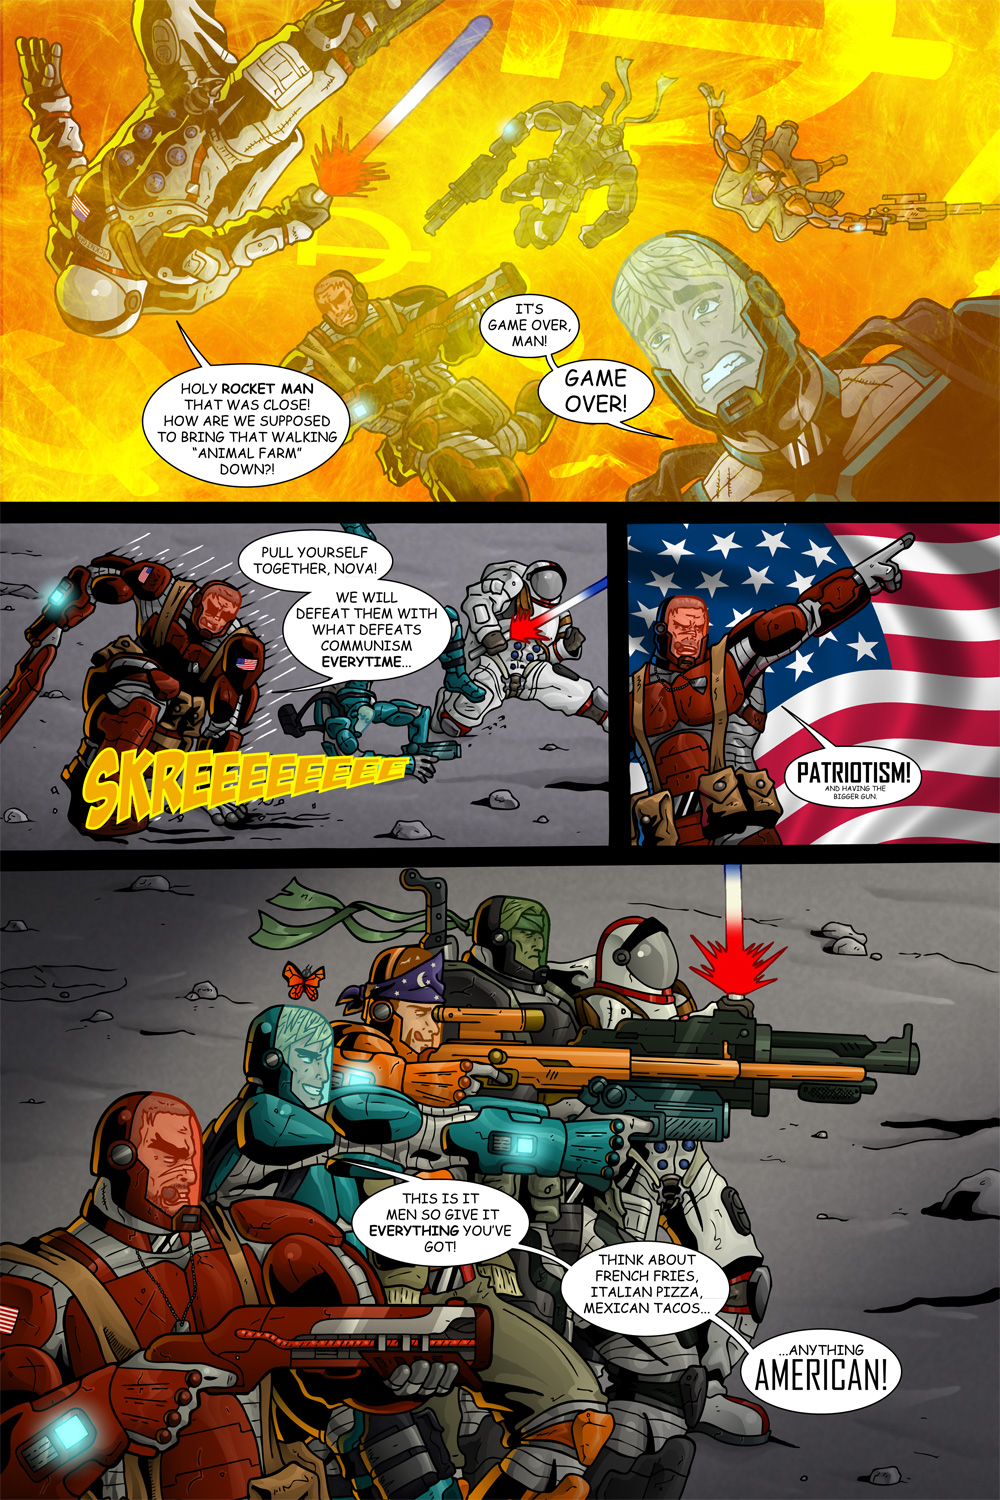 MISSION 007: PAGE 21 “GAME OVER, MAN!”